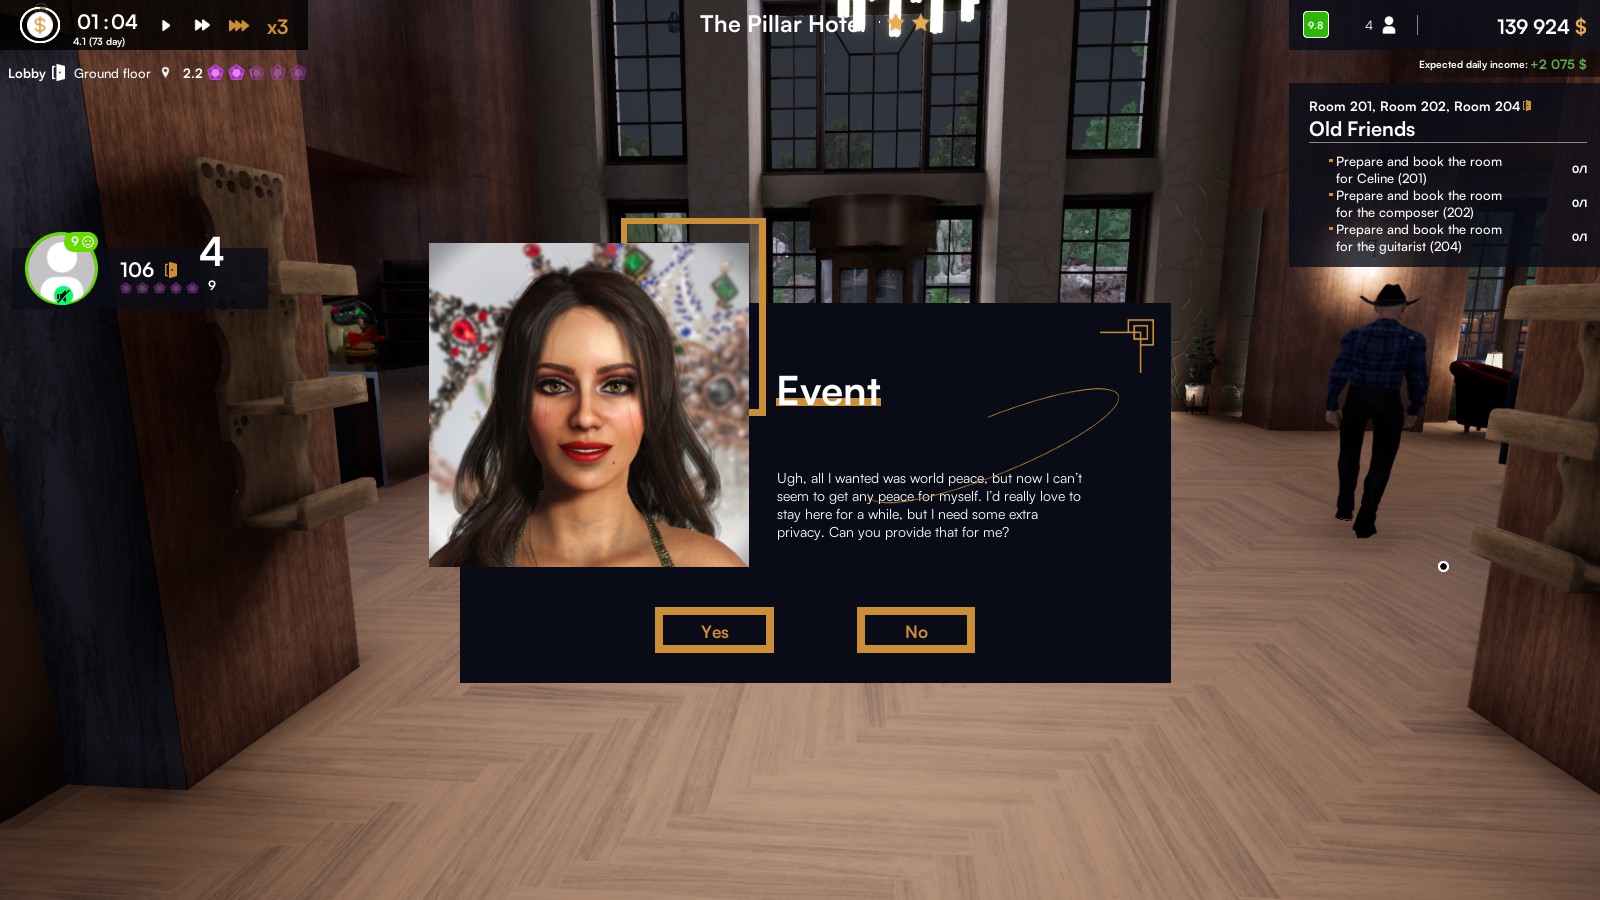 A woman's portrait with a text box asking you if you can fill a small request for privacy, behind the box is the lobby with a man wearing a cowboy hat and blue shirt with hhis back turned to you.